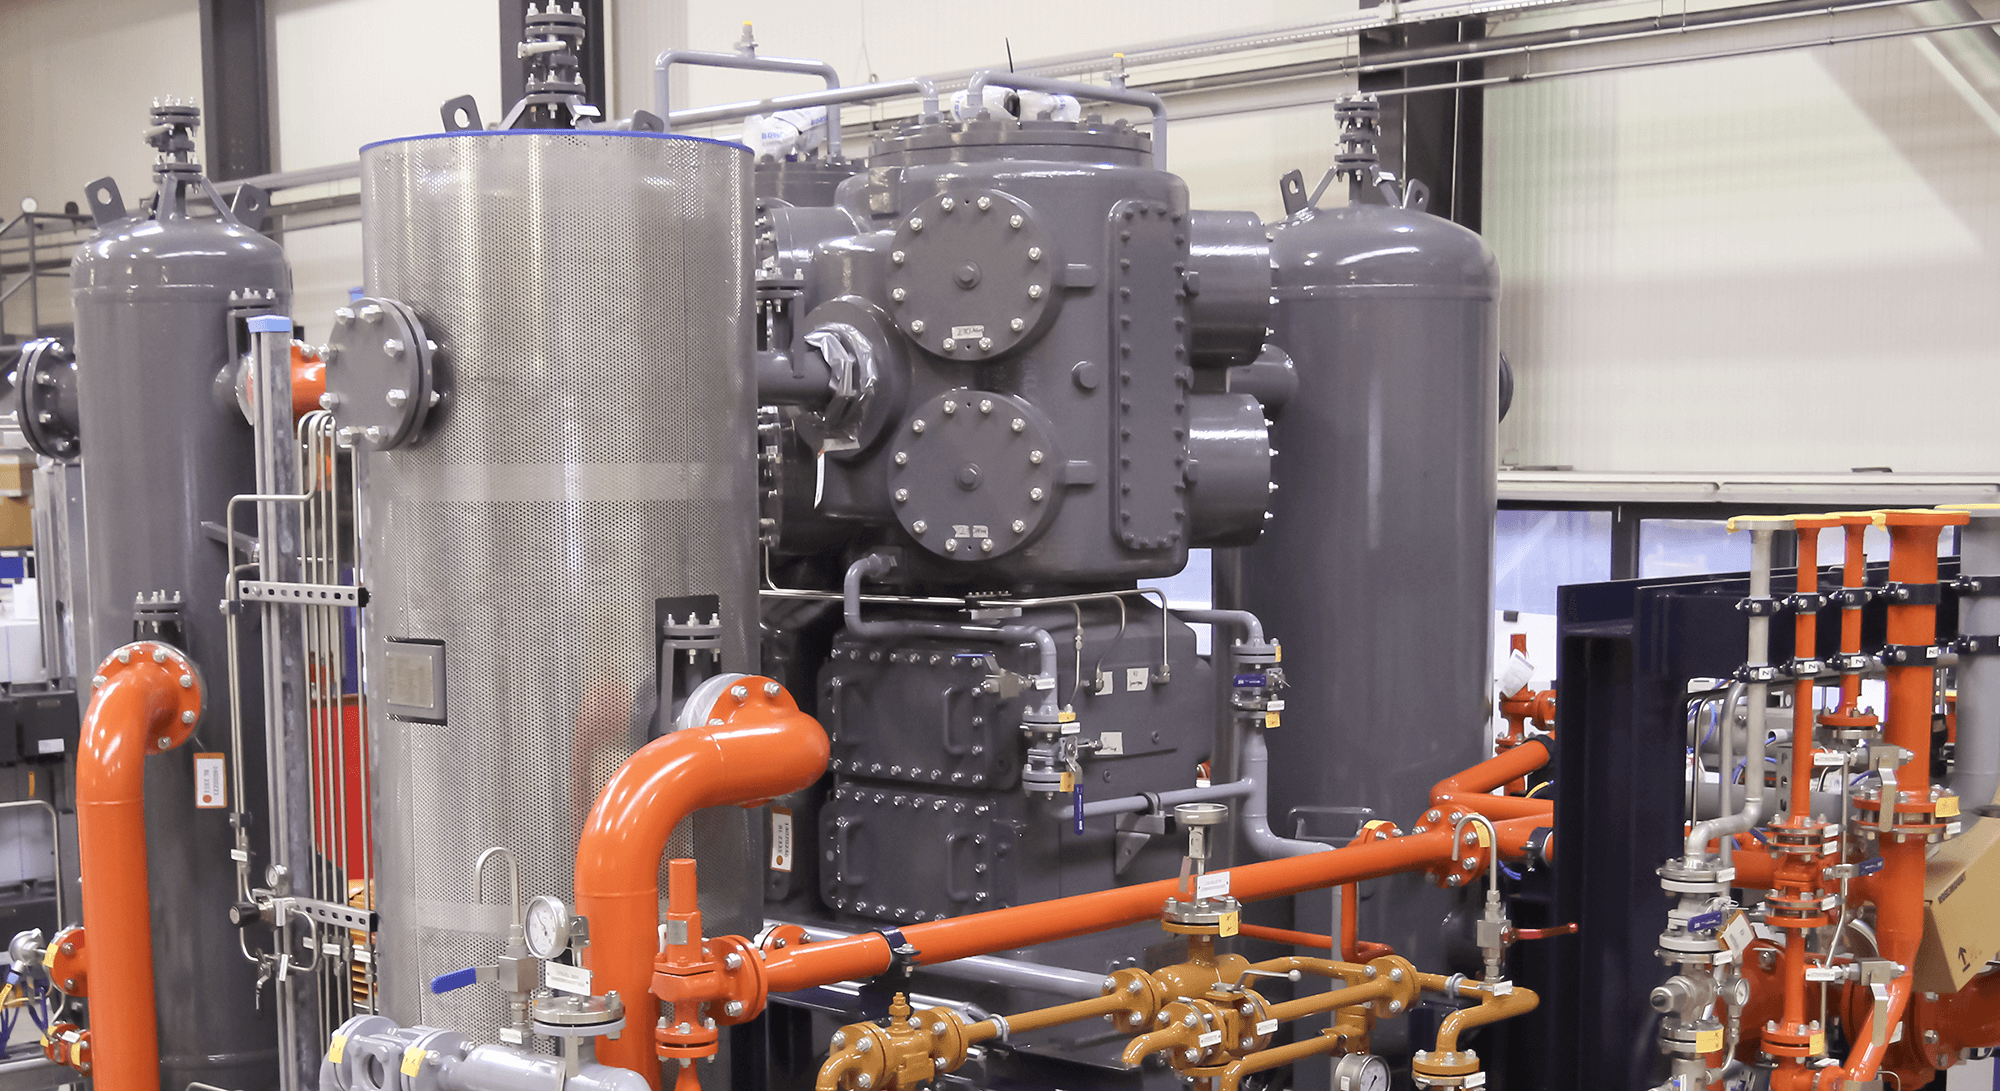 Pictured is a dark gray, standing reciprocating compressor of the PV series with pulsation vessels in BZM's assembly hall.